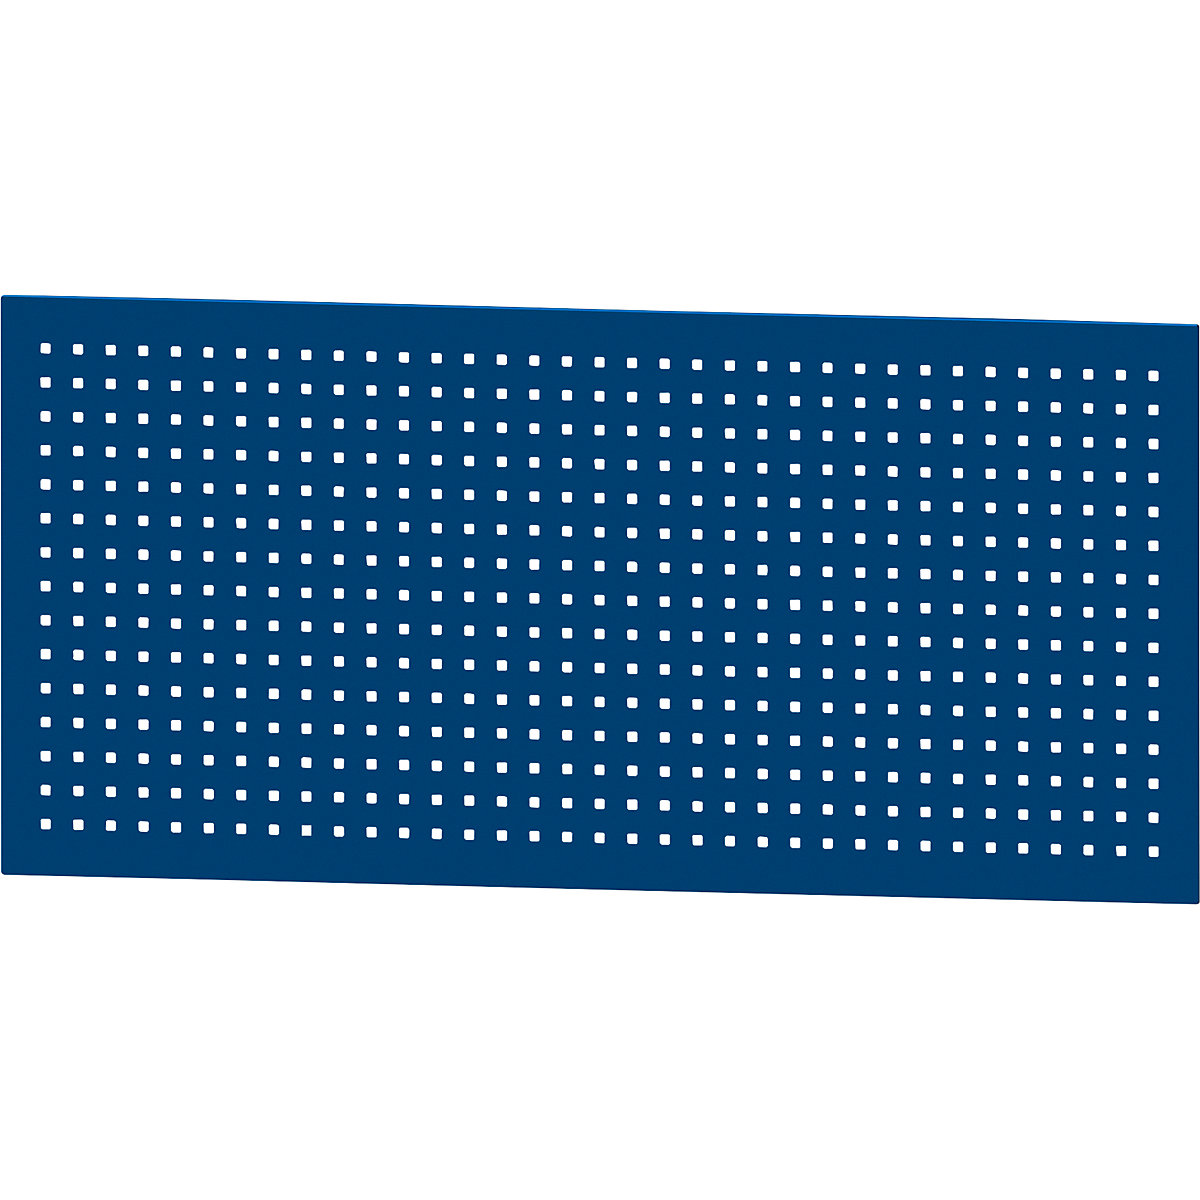 Modular system perforated panel for electrically height adjustable LIFT work tables - ANKE